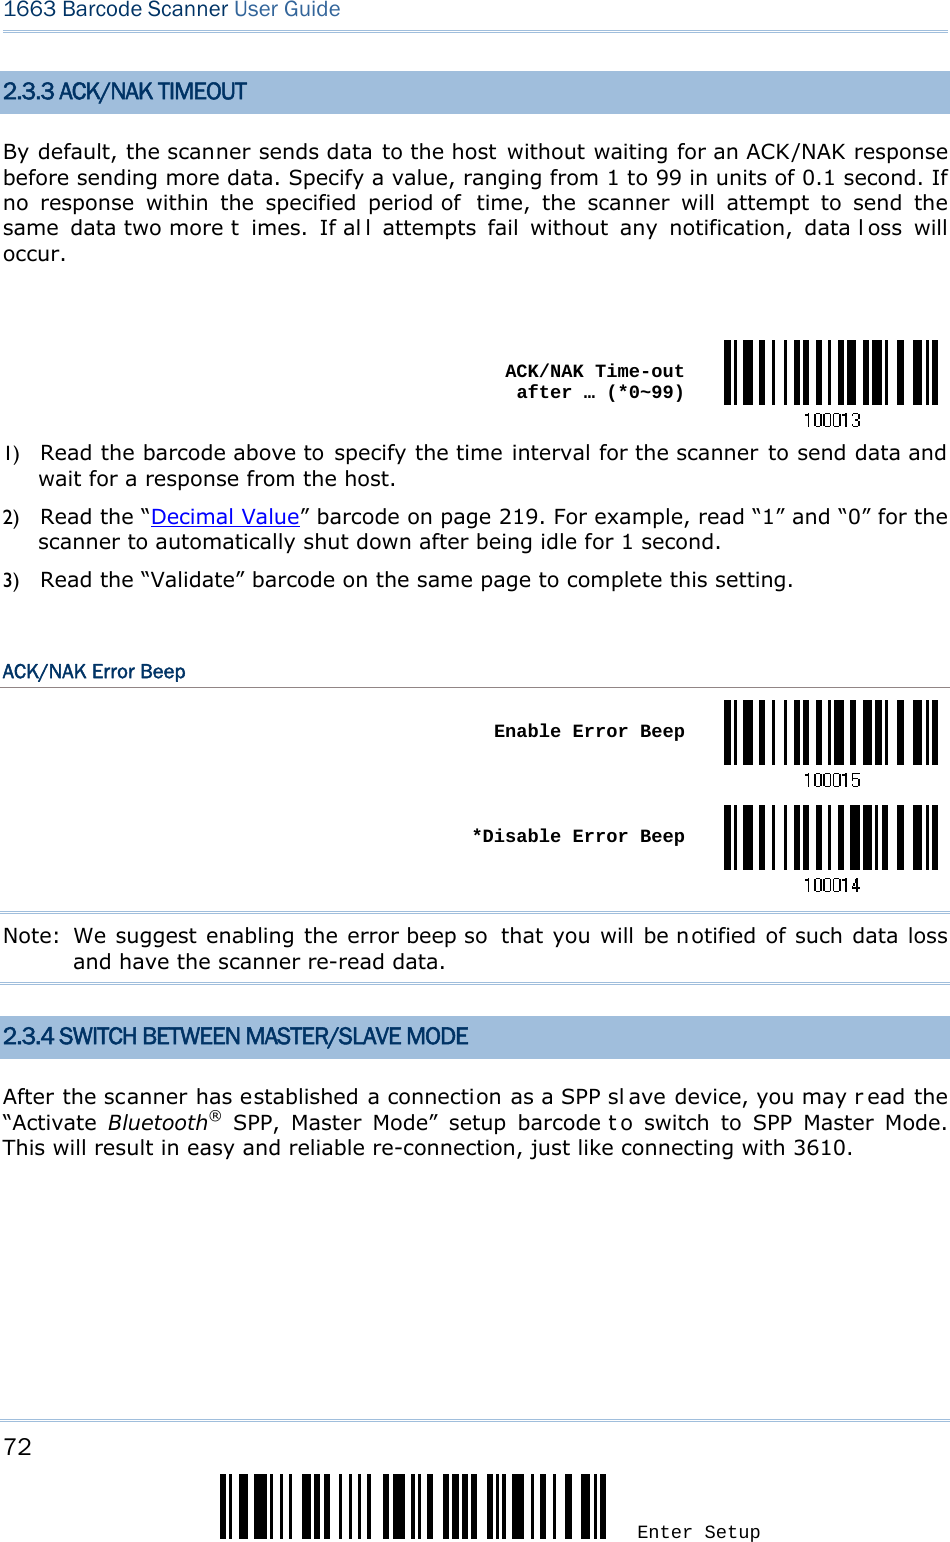 72 Enter Setup 1663 Barcode Scanner User Guide  2.3.3 ACK/NAK TIMEOUT By default, the scanner sends data to the host without waiting for an ACK/NAK response before sending more data. Specify a value, ranging from 1 to 99 in units of 0.1 second. If no response within the specified period of  time, the scanner will attempt to send the same data two more t imes. If al l attempts fail without any notification, data l oss will occur.   ACK/NAK Time-out after … (*0~99)1) Read the barcode above to specify the time interval for the scanner to send data and wait for a response from the host.             2) Read the “Decimal Value” barcode on page 219. For example, read “1” and “0” for the scanner to automatically shut down after being idle for 1 second.   3) Read the “Validate” barcode on the same page to complete this setting.  ACK/NAK Error Beep  Enable Error Beep *Disable Error BeepNote:  We suggest enabling the error beep so  that you will be notified of such data loss and have the scanner re-read data. 2.3.4 SWITCH BETWEEN MASTER/SLAVE MODE After the scanner has established a connection as a SPP sl ave device, you may r ead the “Activate  Bluetooth® SPP, Master Mode” setup barcode t o switch to SPP Master Mode. This will result in easy and reliable re-connection, just like connecting with 3610.    